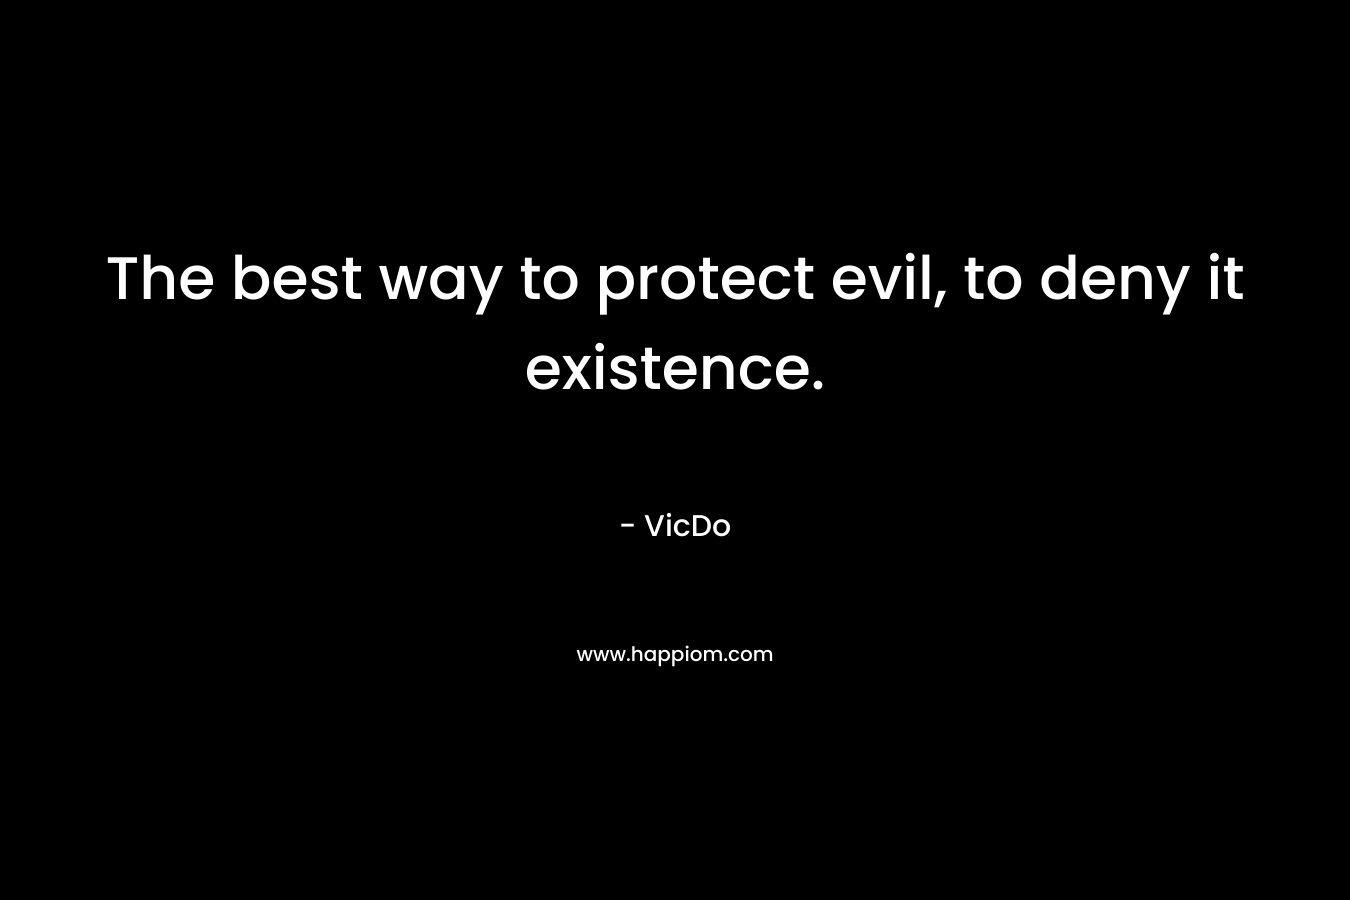 The best way to protect evil, to deny it existence.